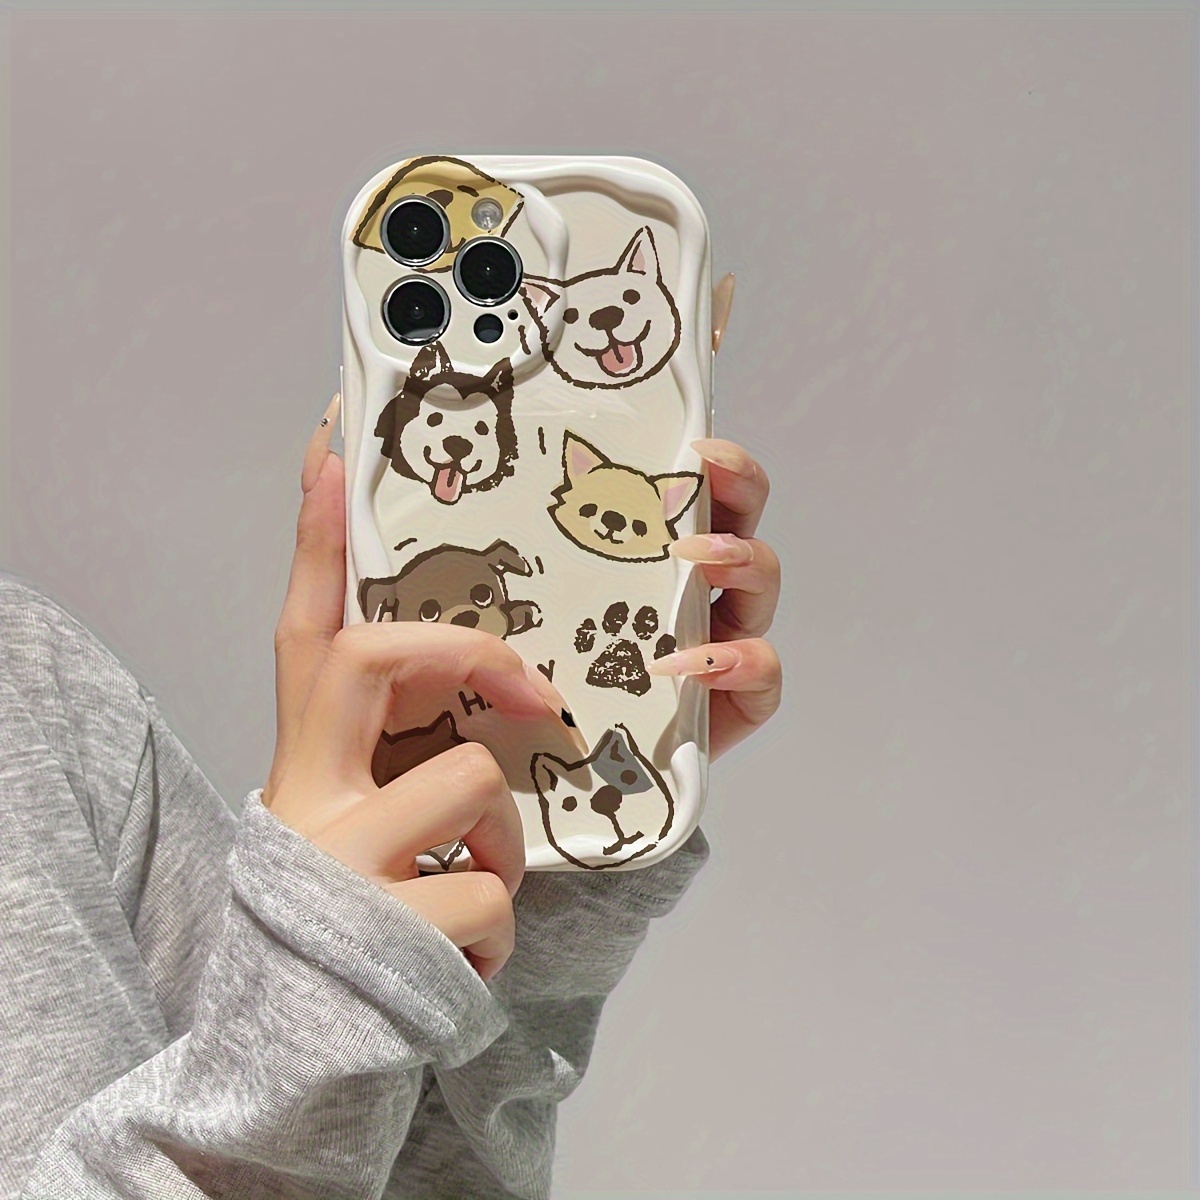 

Adorable Puppy-themed Phone Cases For Iphone 7/8 To 15 Series - Durable, High-quality Tpu, Stylish & Dirt-resistant